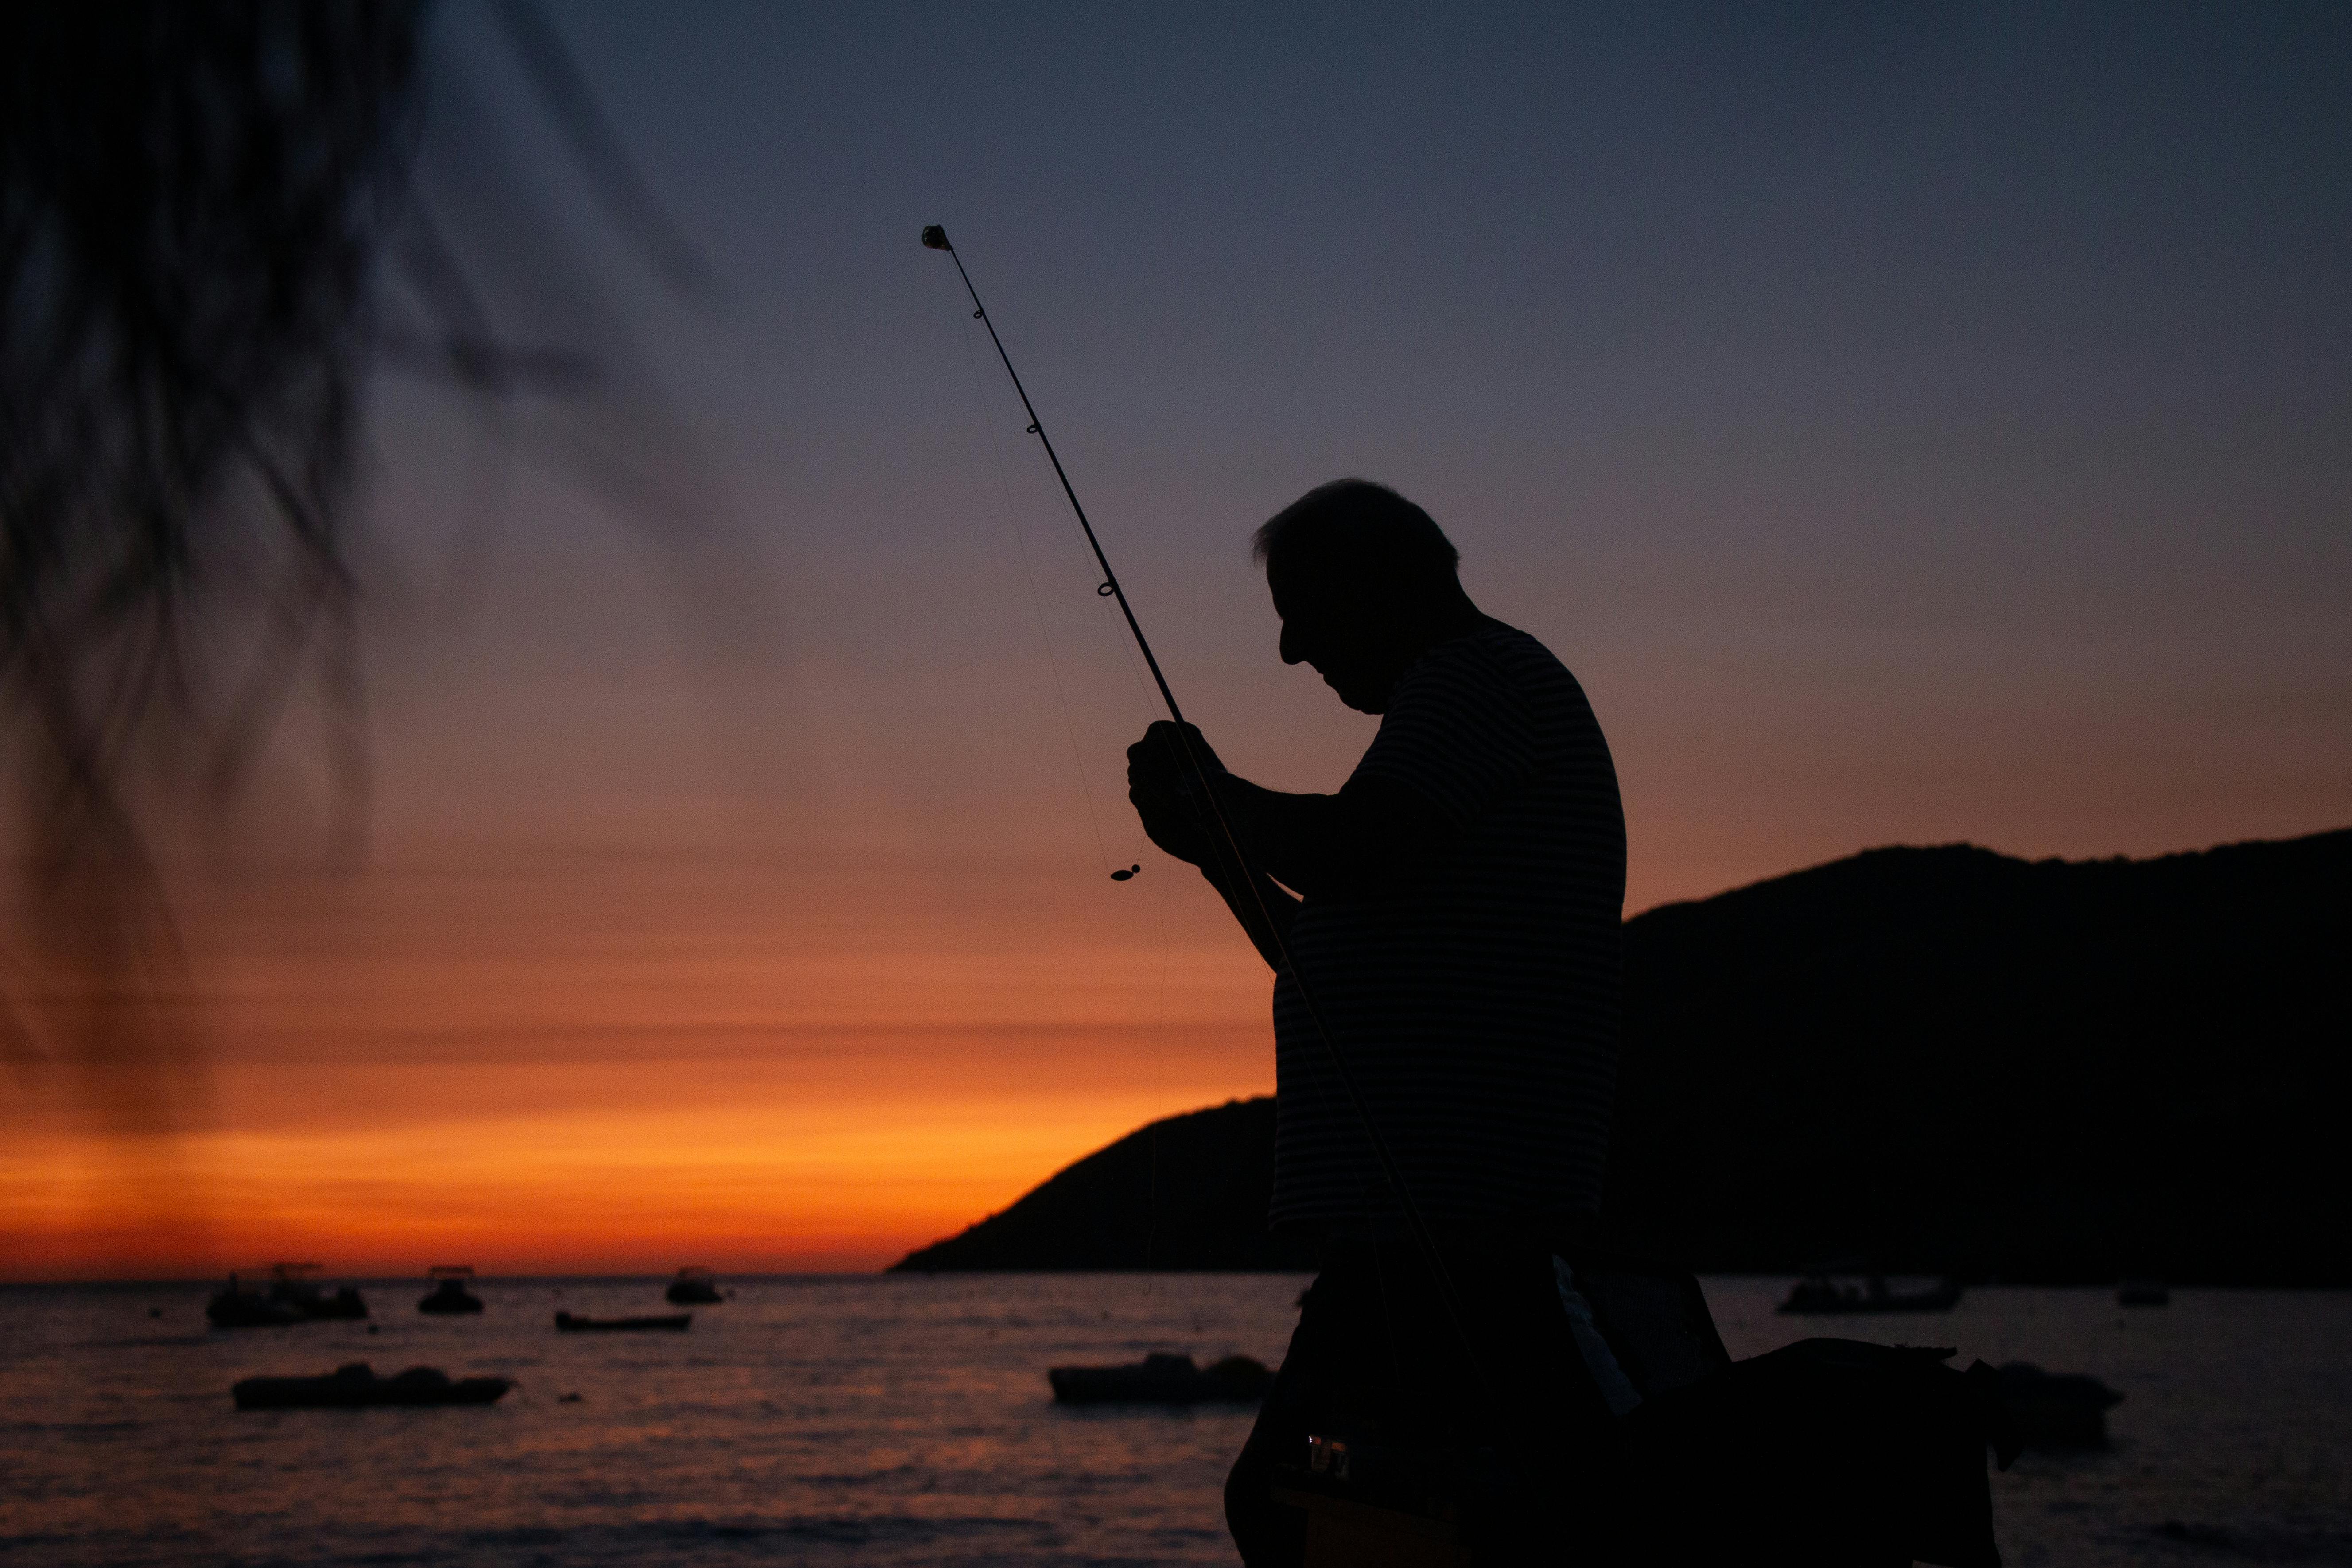 Man Fishing While Sitting on Chair · Free Stock Photo